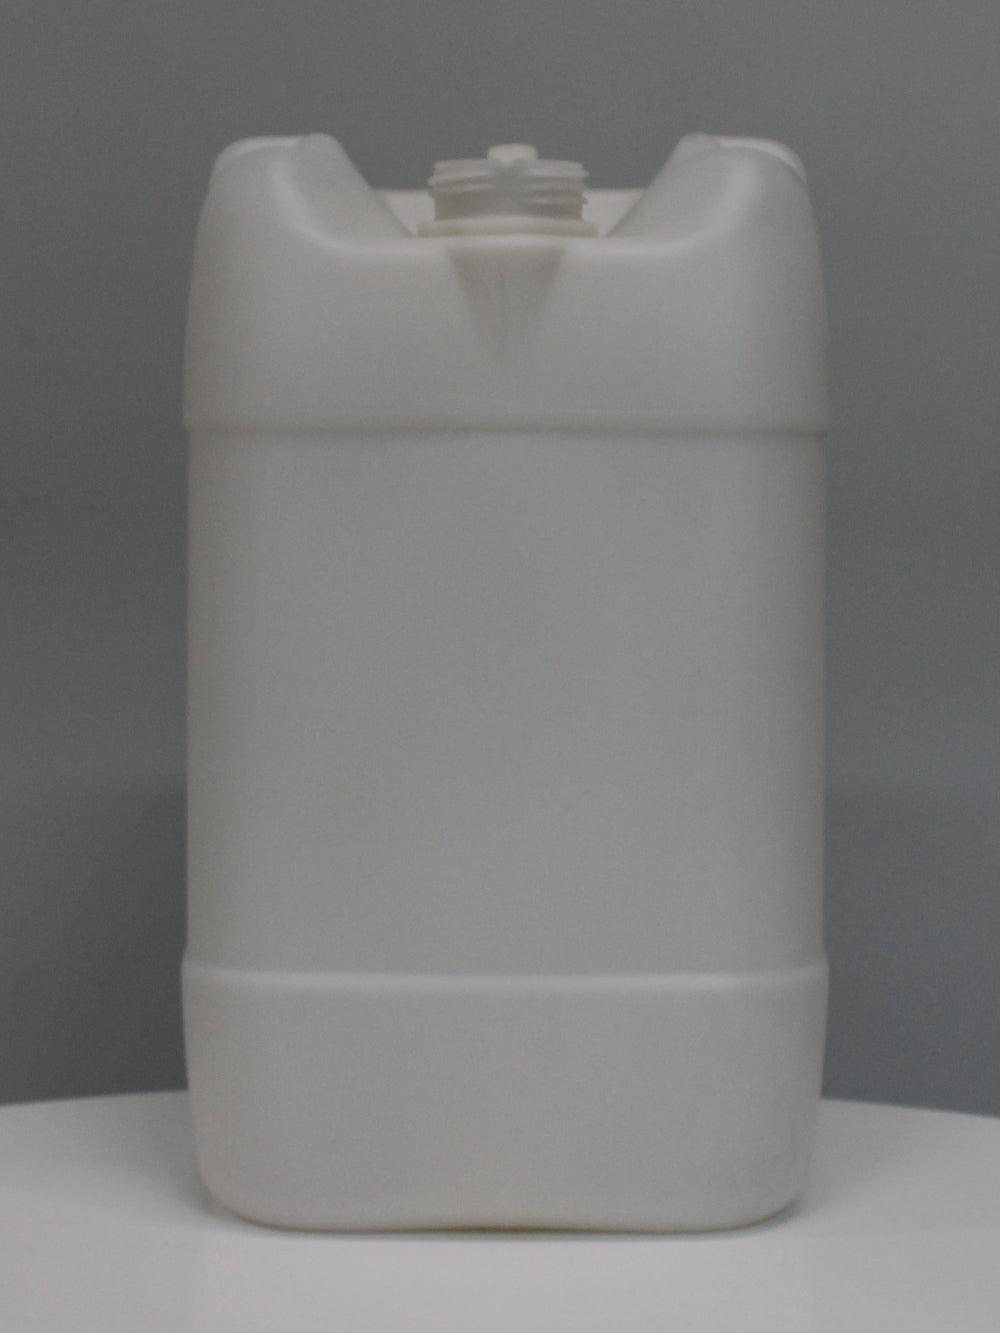 20Lt Rectangle Jerry Can 900g Bottle - (Pack of 3 units)